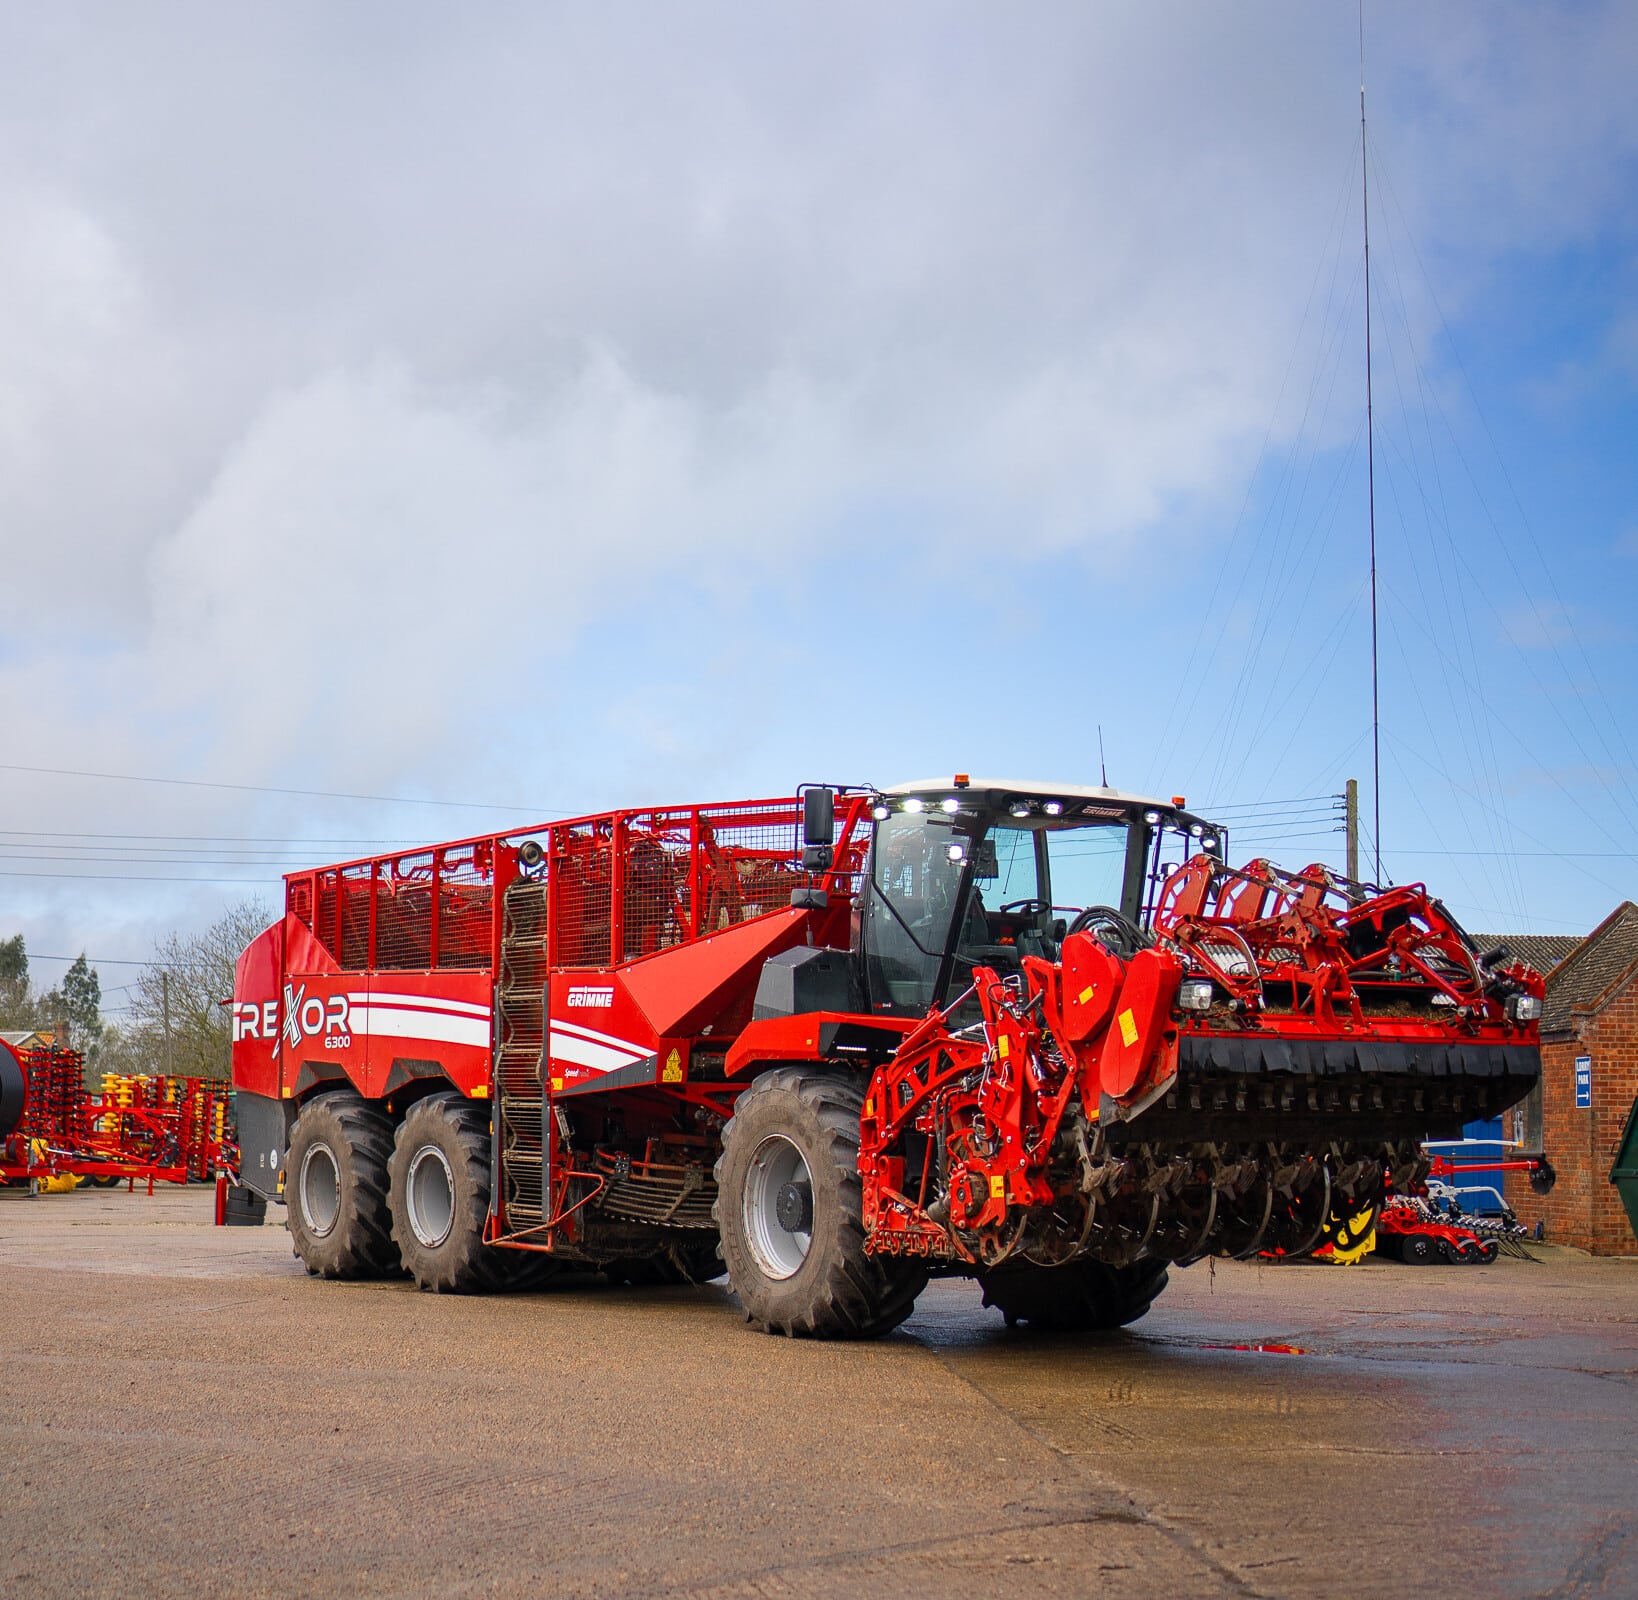 GRIMME Six-Wheeled Beet Harvester Enters The Worlingworth Yard